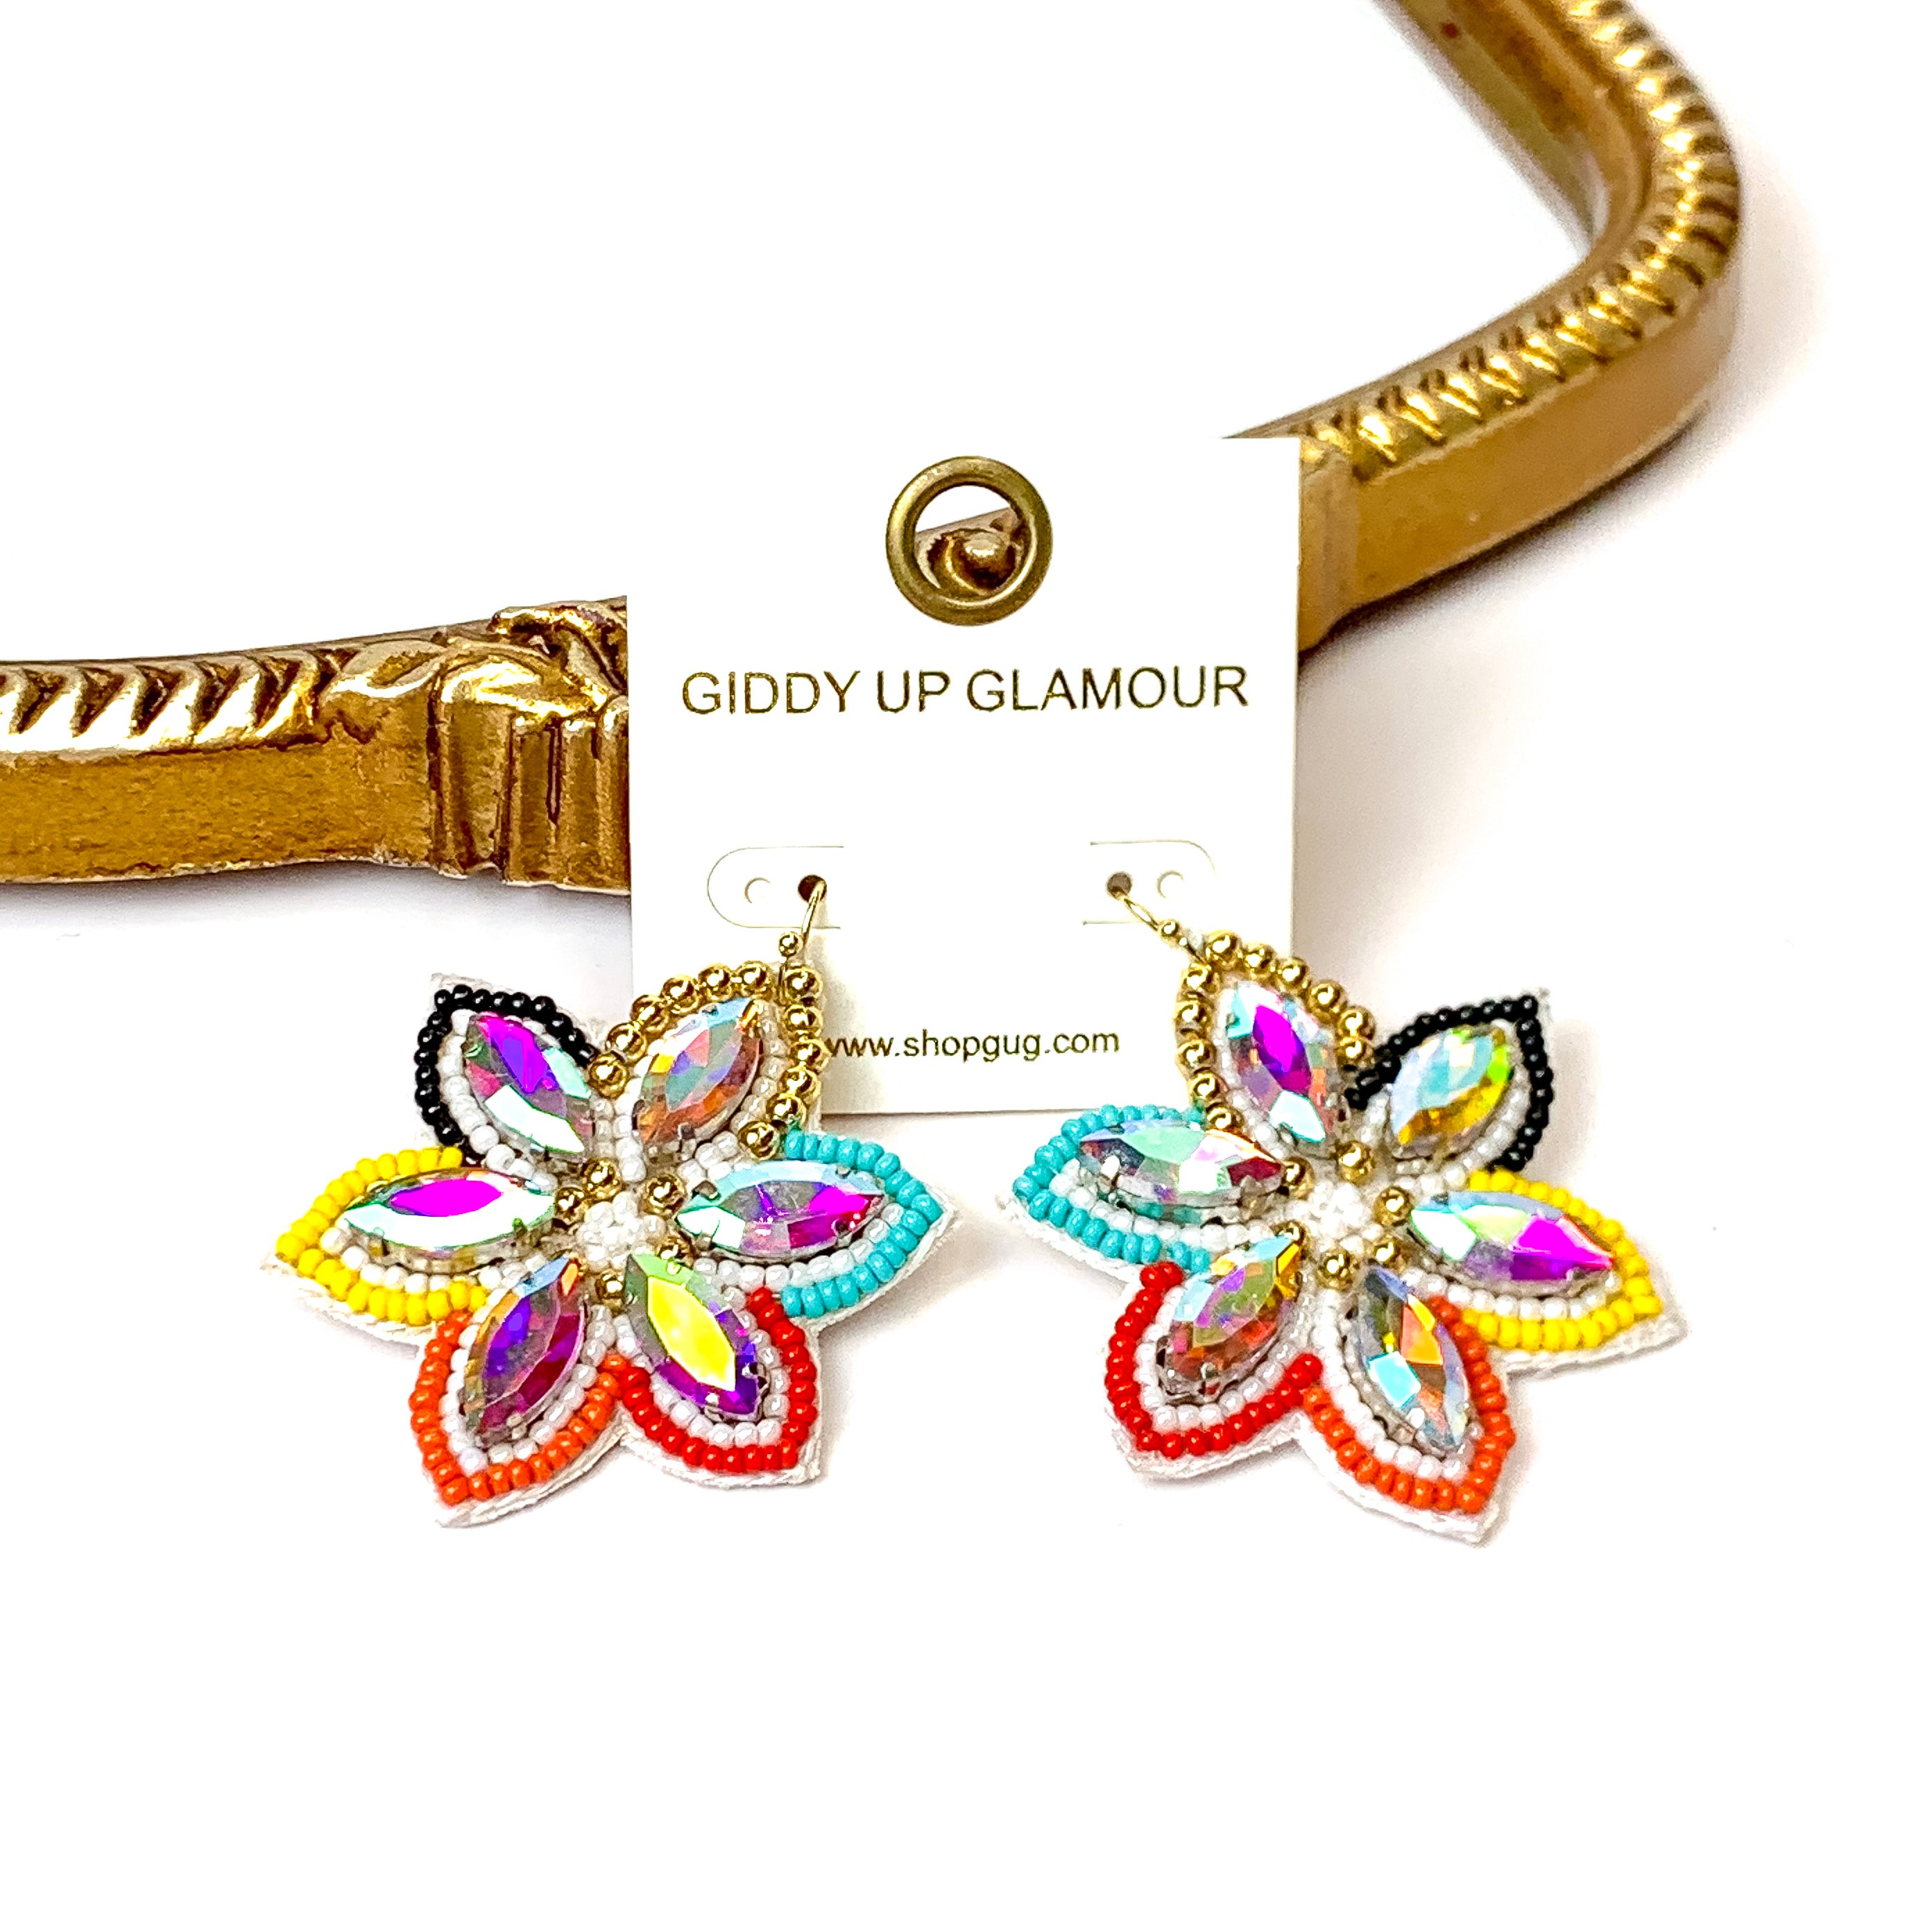 Desert Daisy Multicolored Flower Shaped Earrings with AB Crystal Accents in White